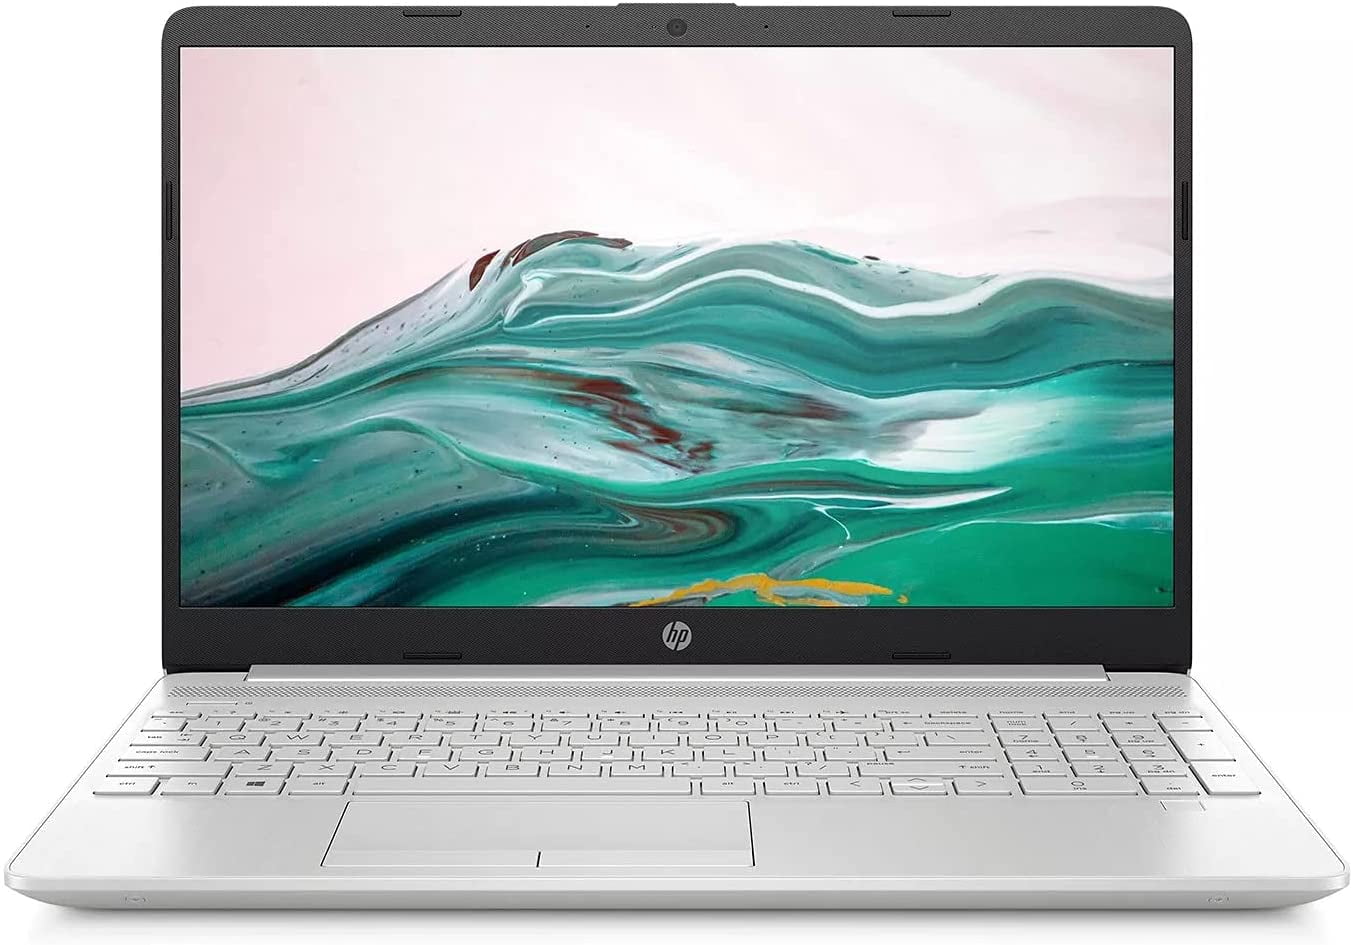 Restored HP 15.6" Touchscreen Laptop, Intel Core i5 i5-1135G7, 8GB RAM, 256GB SSD, Windows 10 Home, Natural Silver, 15-dw3056cl (Refurbished)